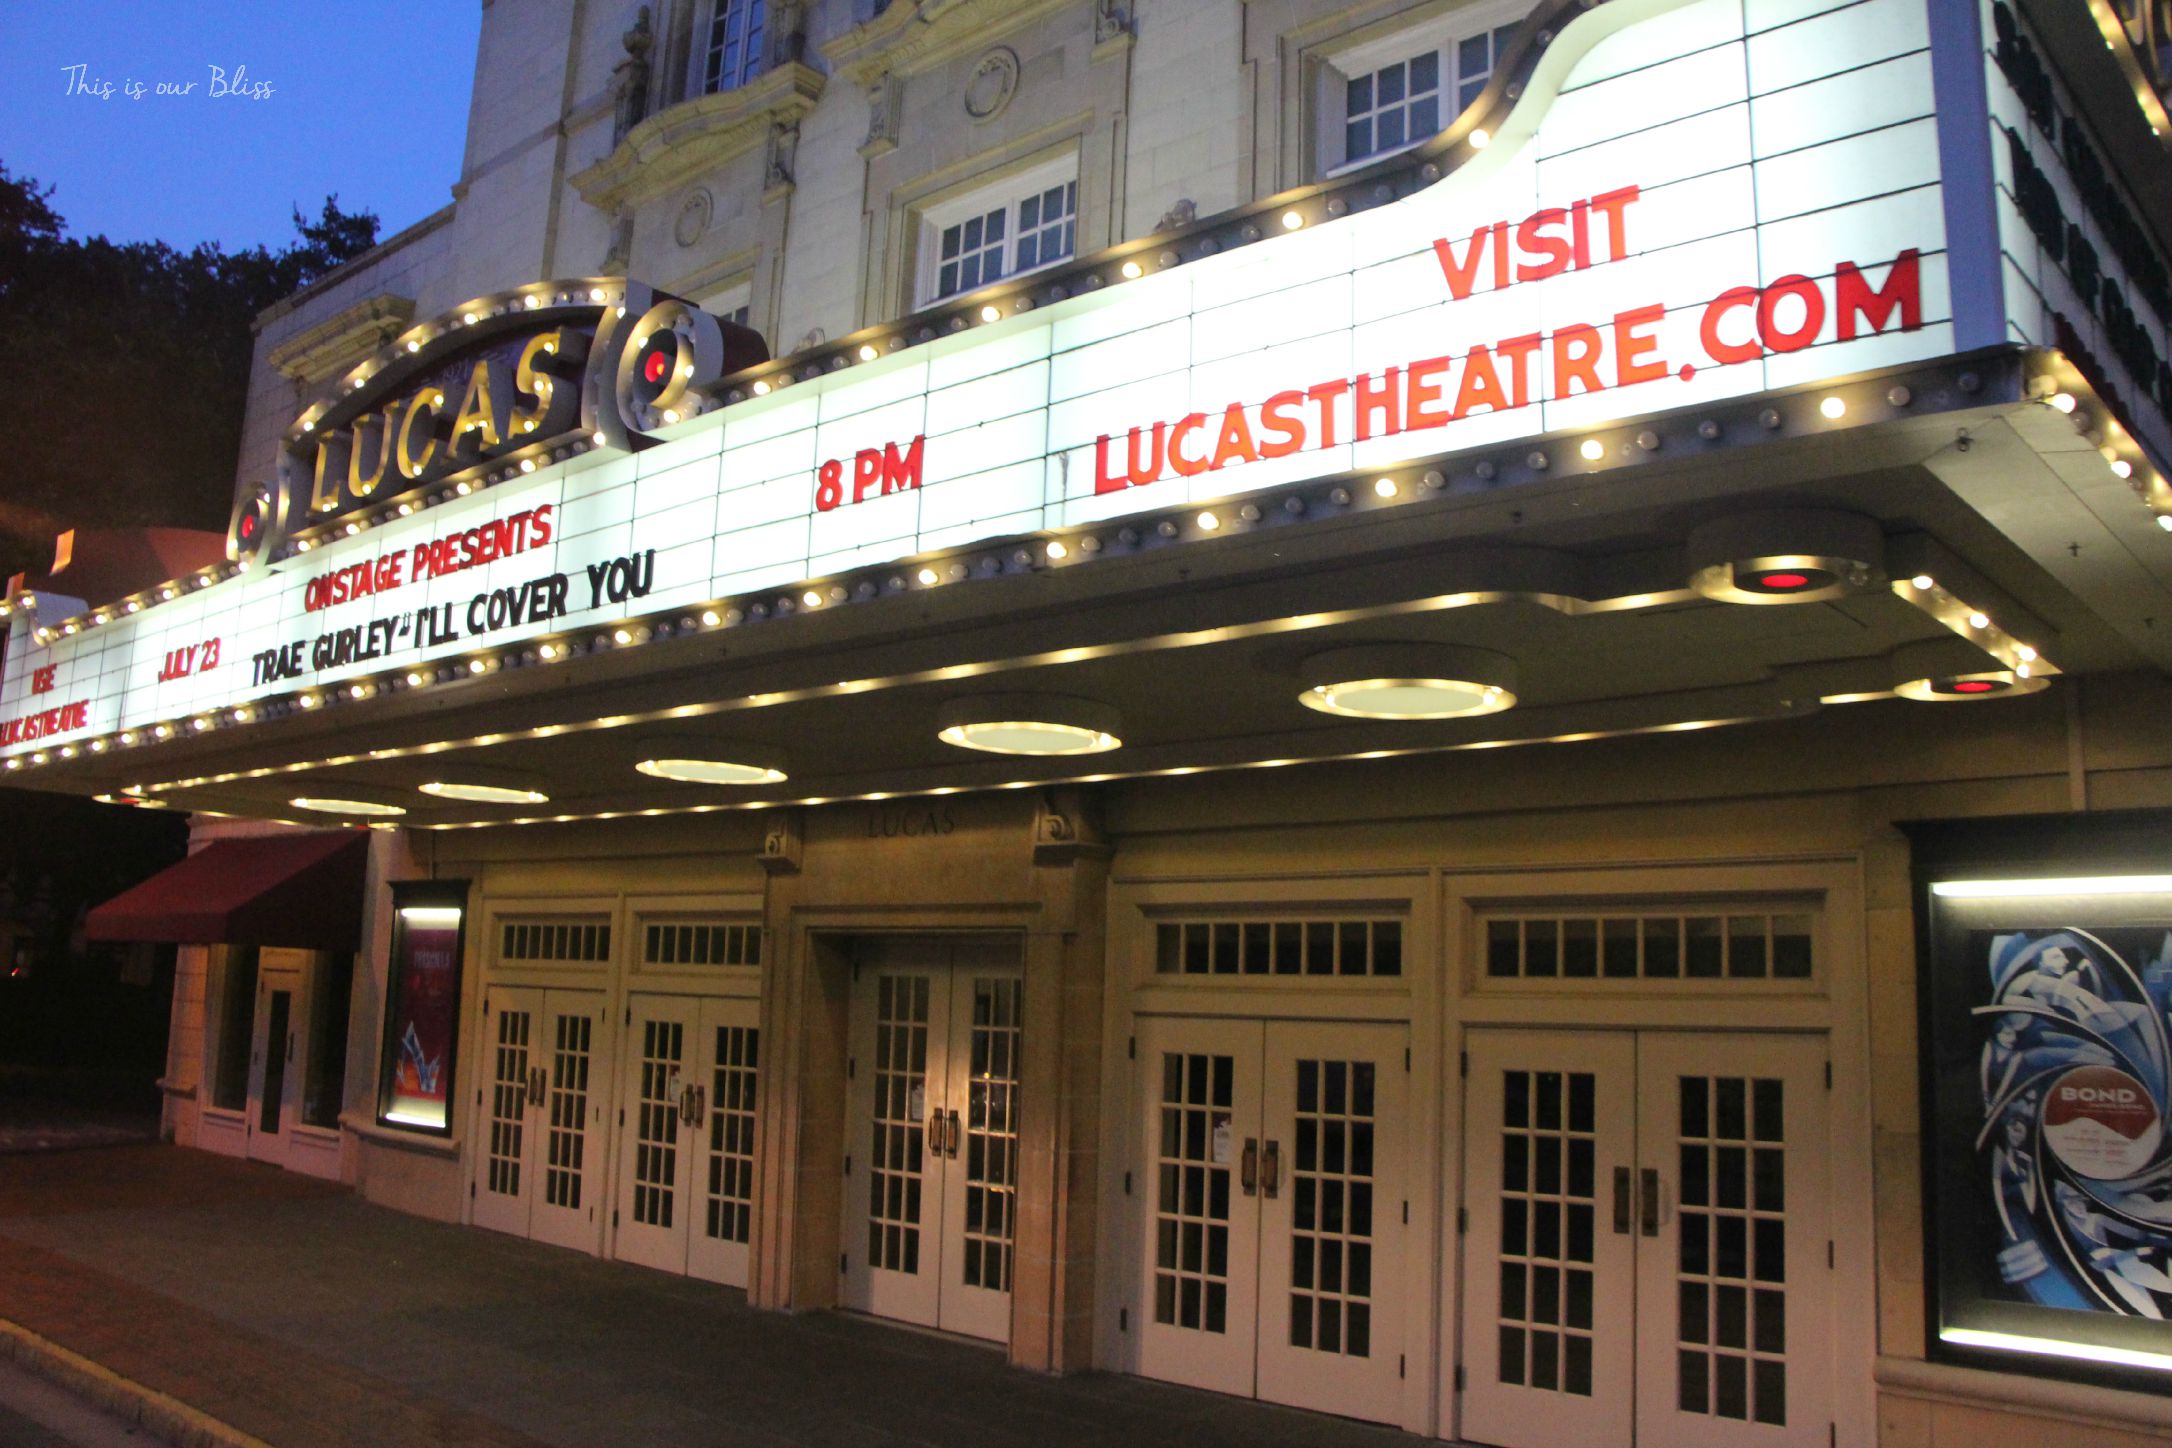 Historic Lucas Theater - Savannah GA - This is our Bliss